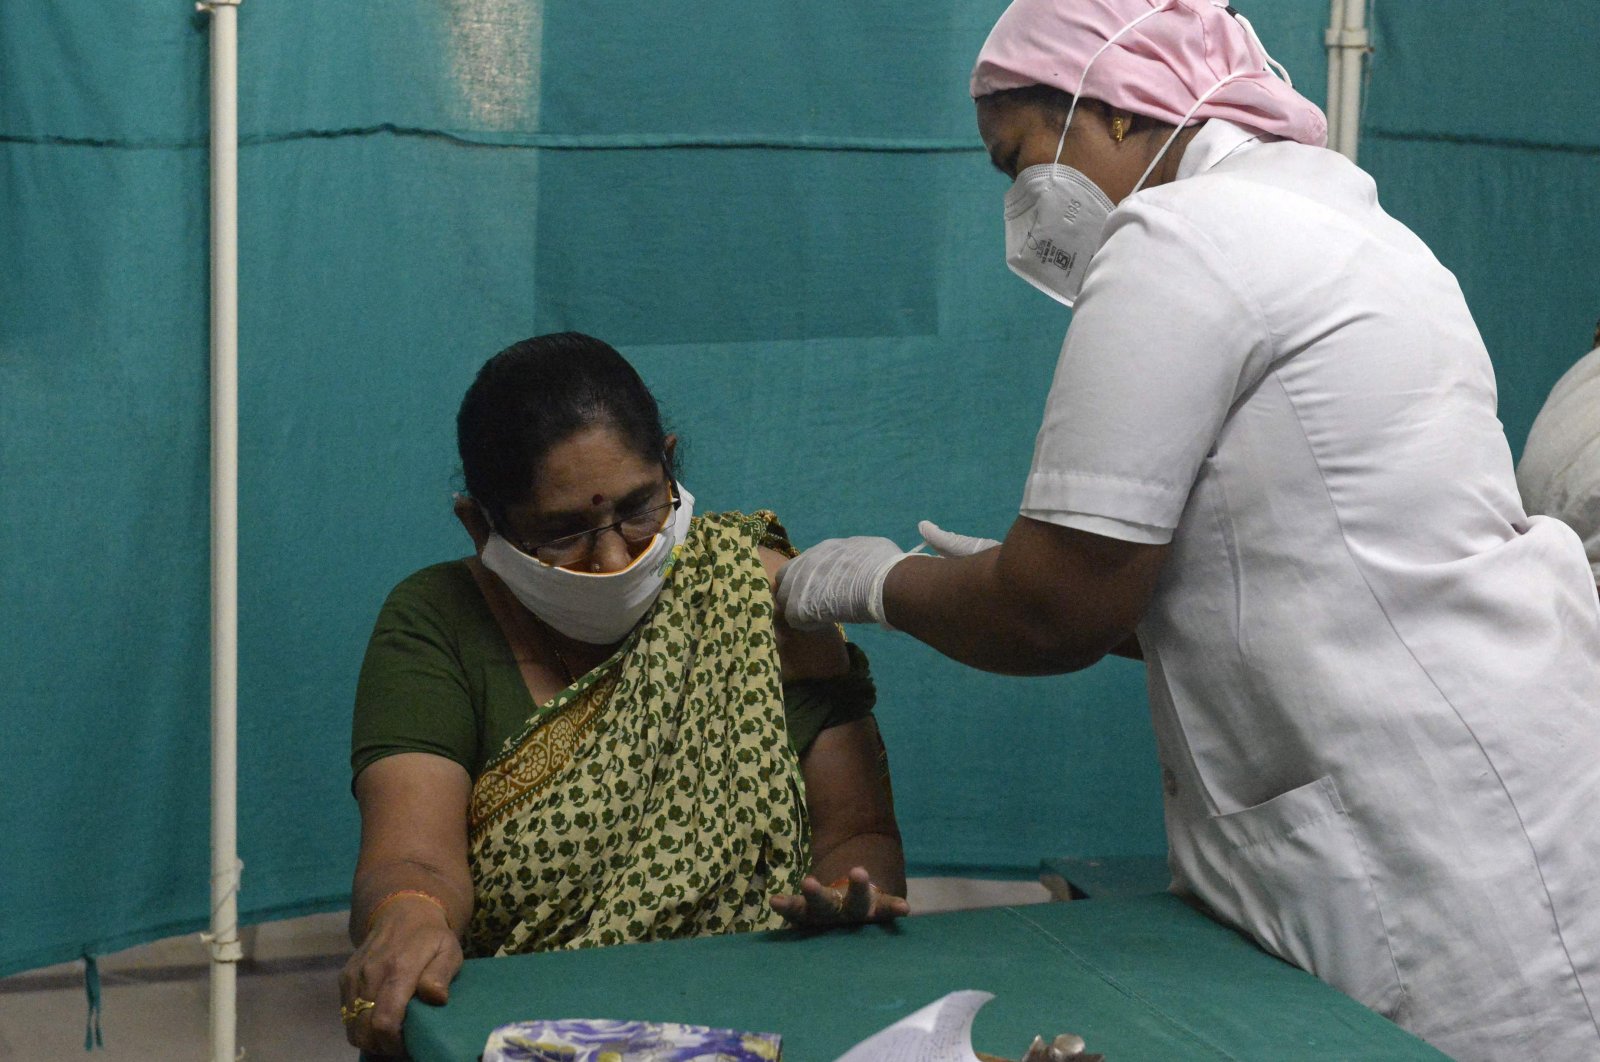 A medical worker inoculates a woman with the dose of Covishield, AstraZeneca-Oxford's COVID-19 vaccine at a government hospital in Hyderabad, India, on April 1, 2021. (AFP)